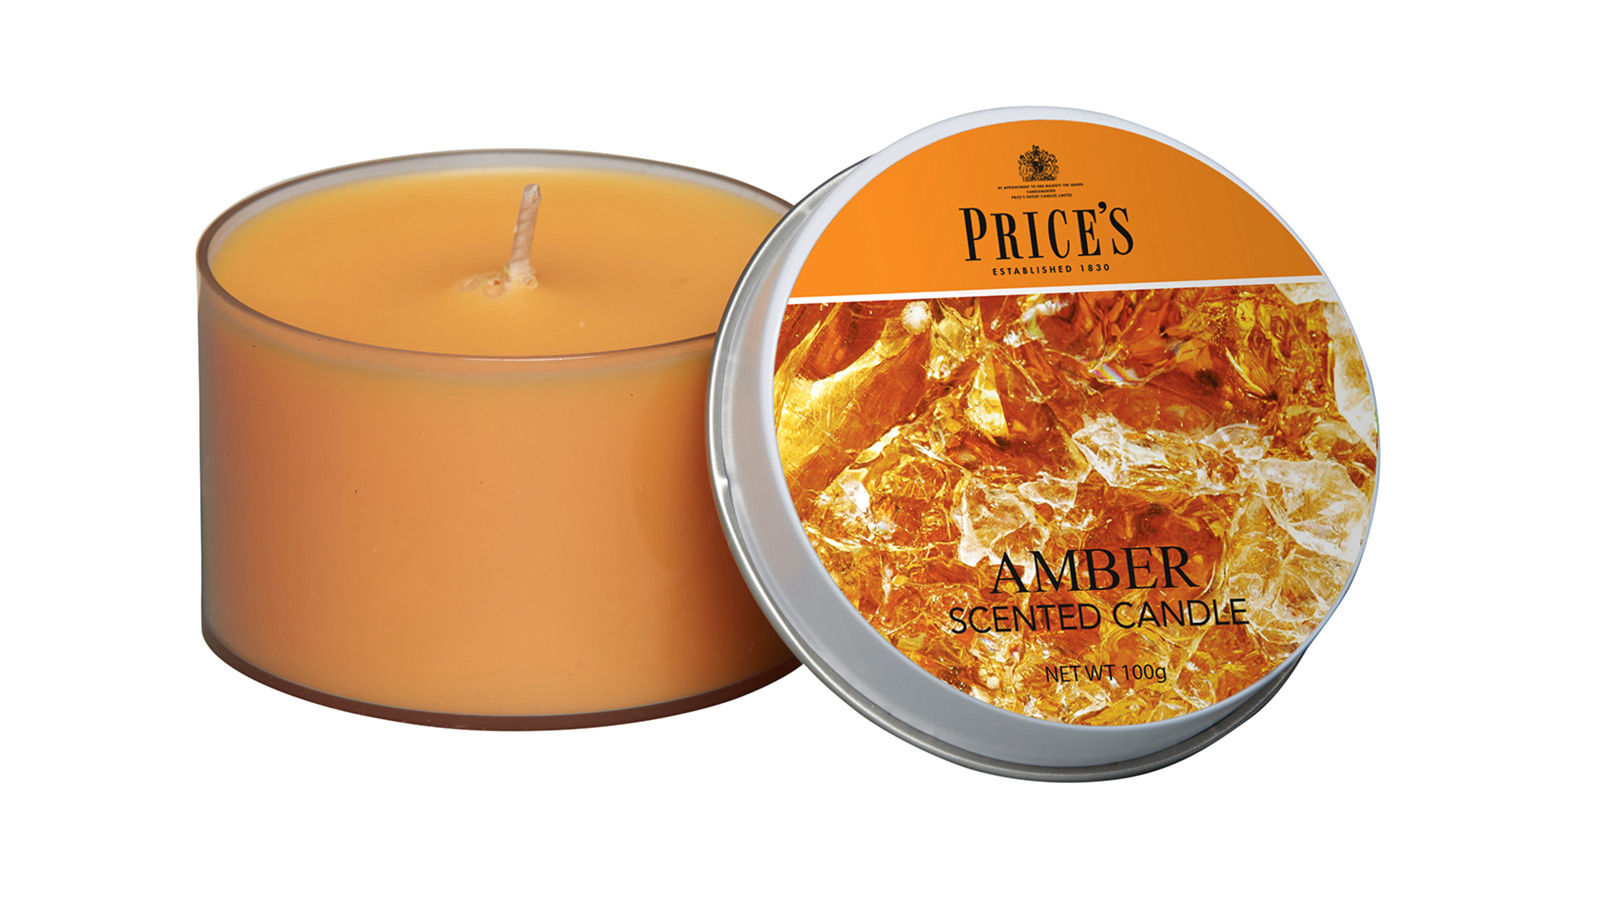 Prices Candle "Amber" 100g     